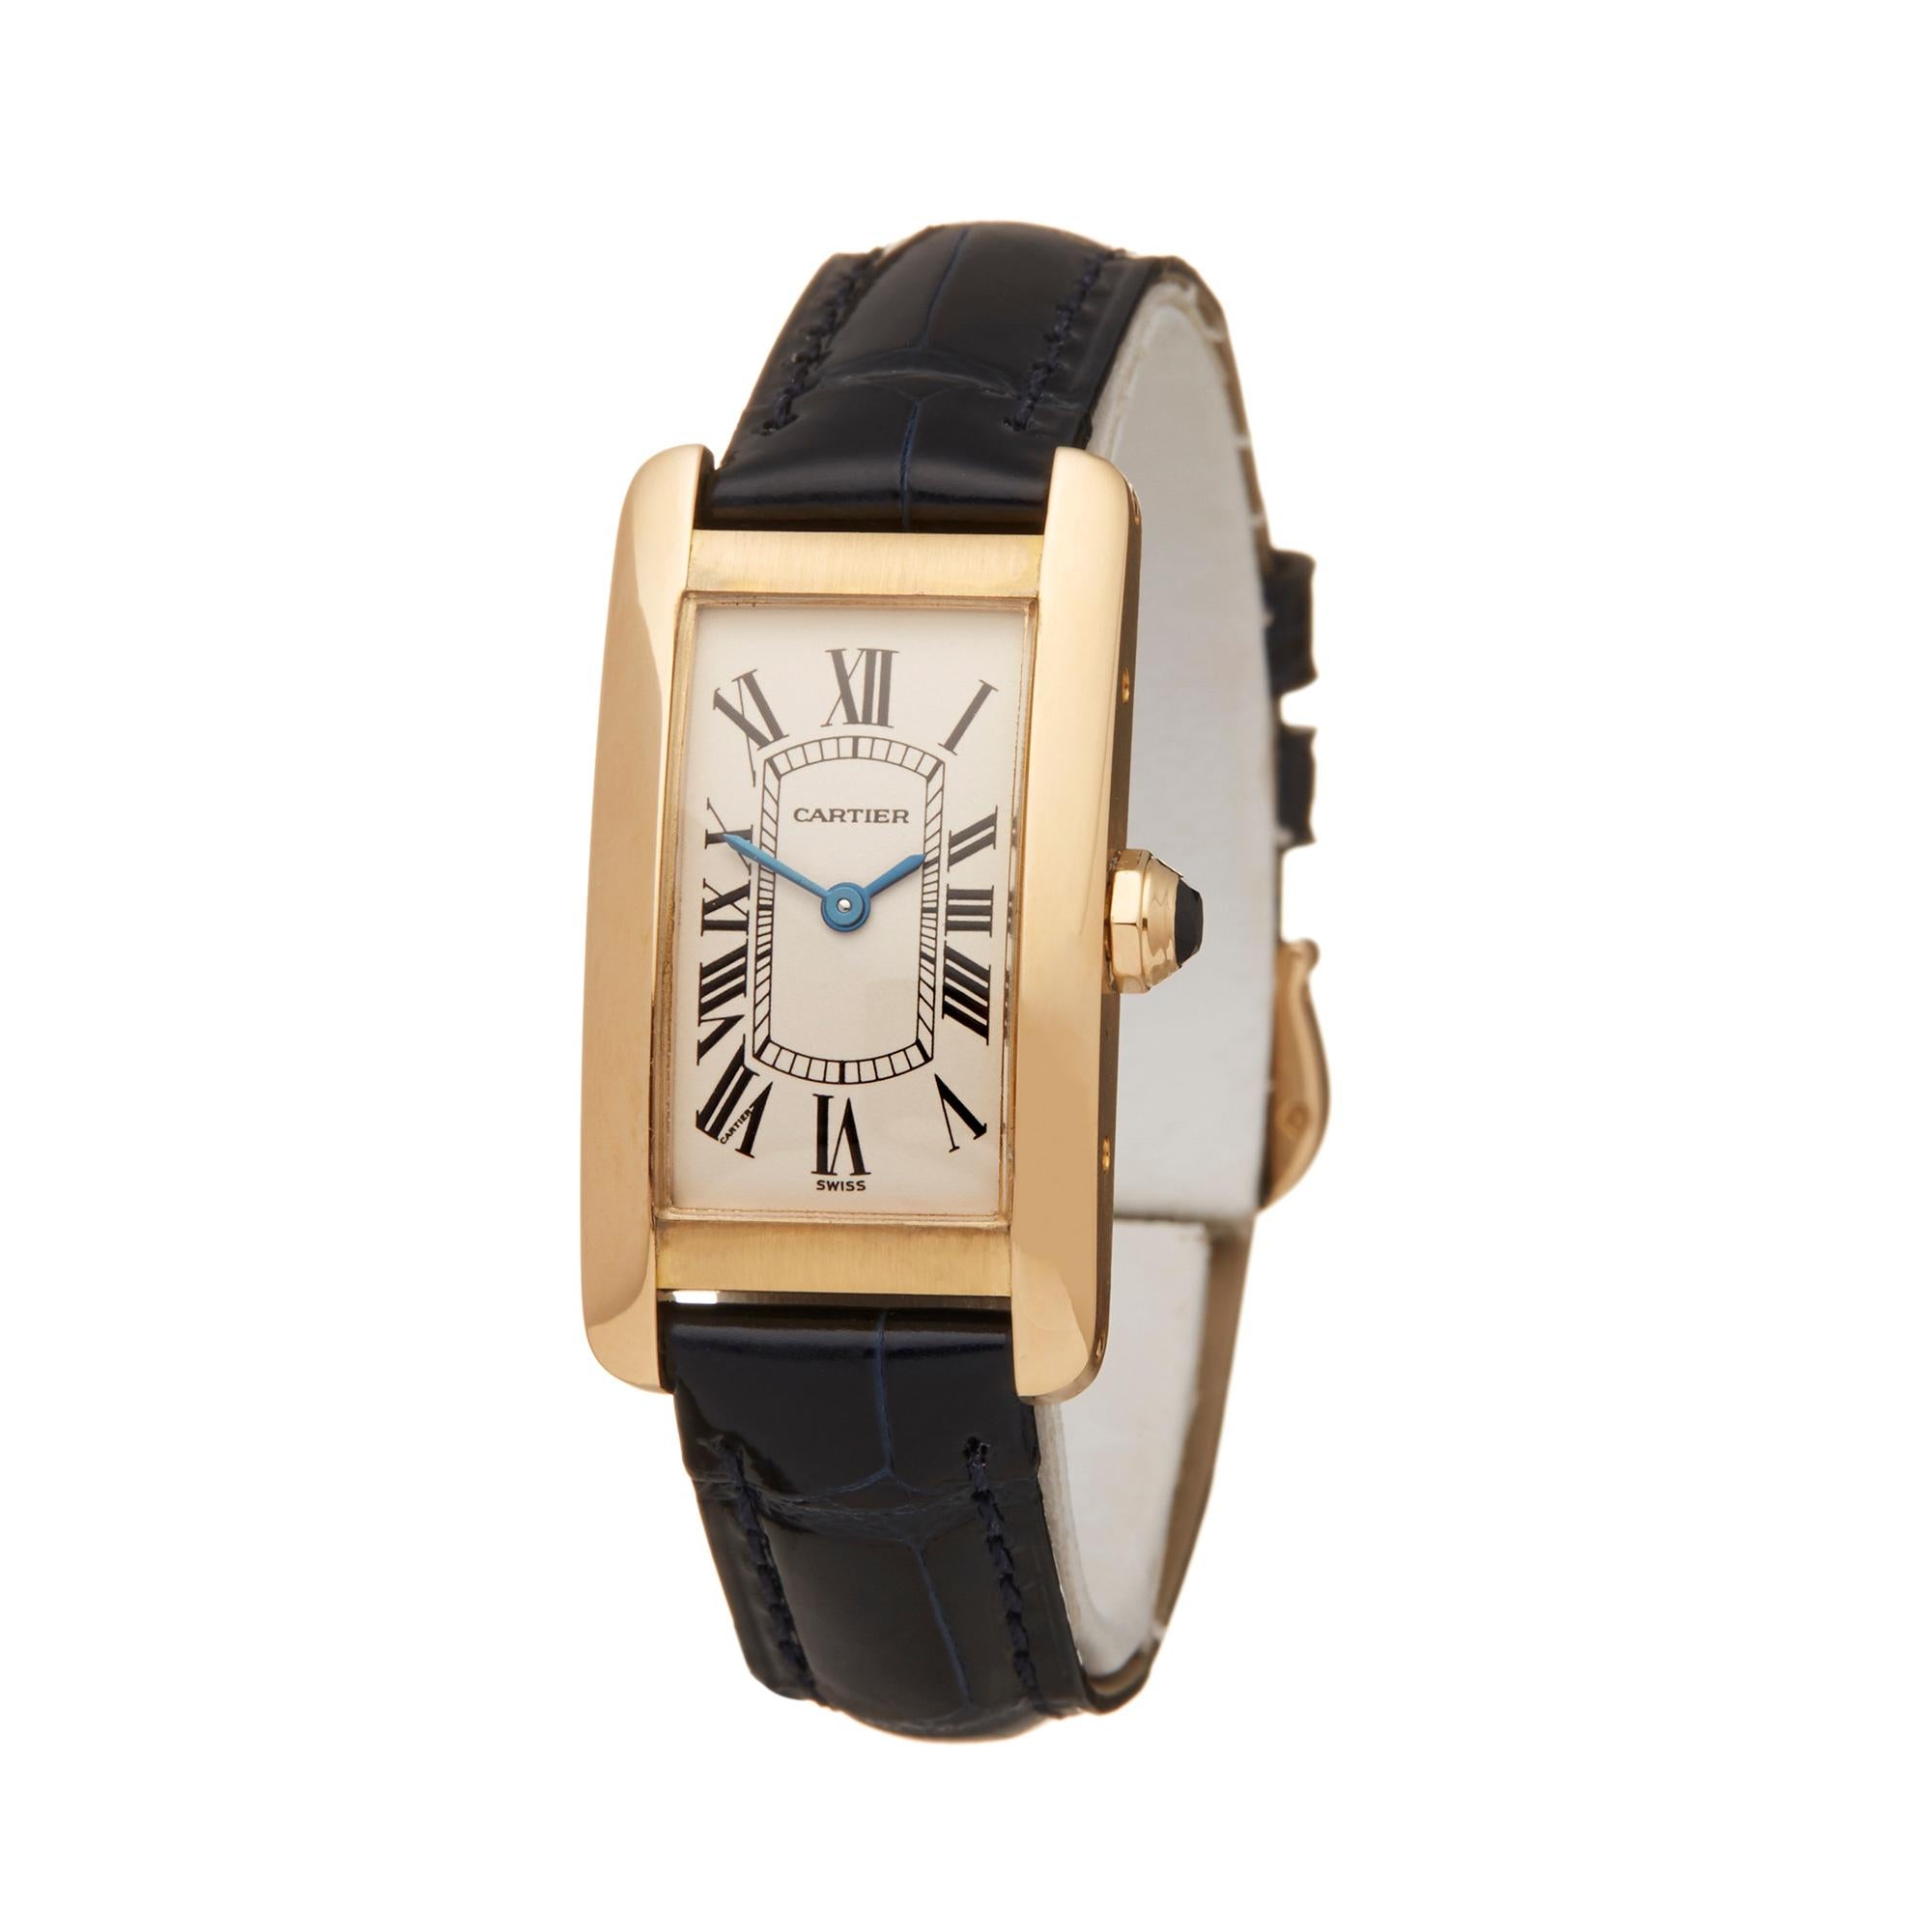 Reference: W5761
Manufacturer: Cartier
Model: Tank Americaine
Model Reference: 1710
Age: Circa 2000's
Gender: Women's
Box and Papers: Box Only
Dial: White Roman
Glass: Sapphire Crystal
Movement: Quartz
Water Resistance: To Manufacturers